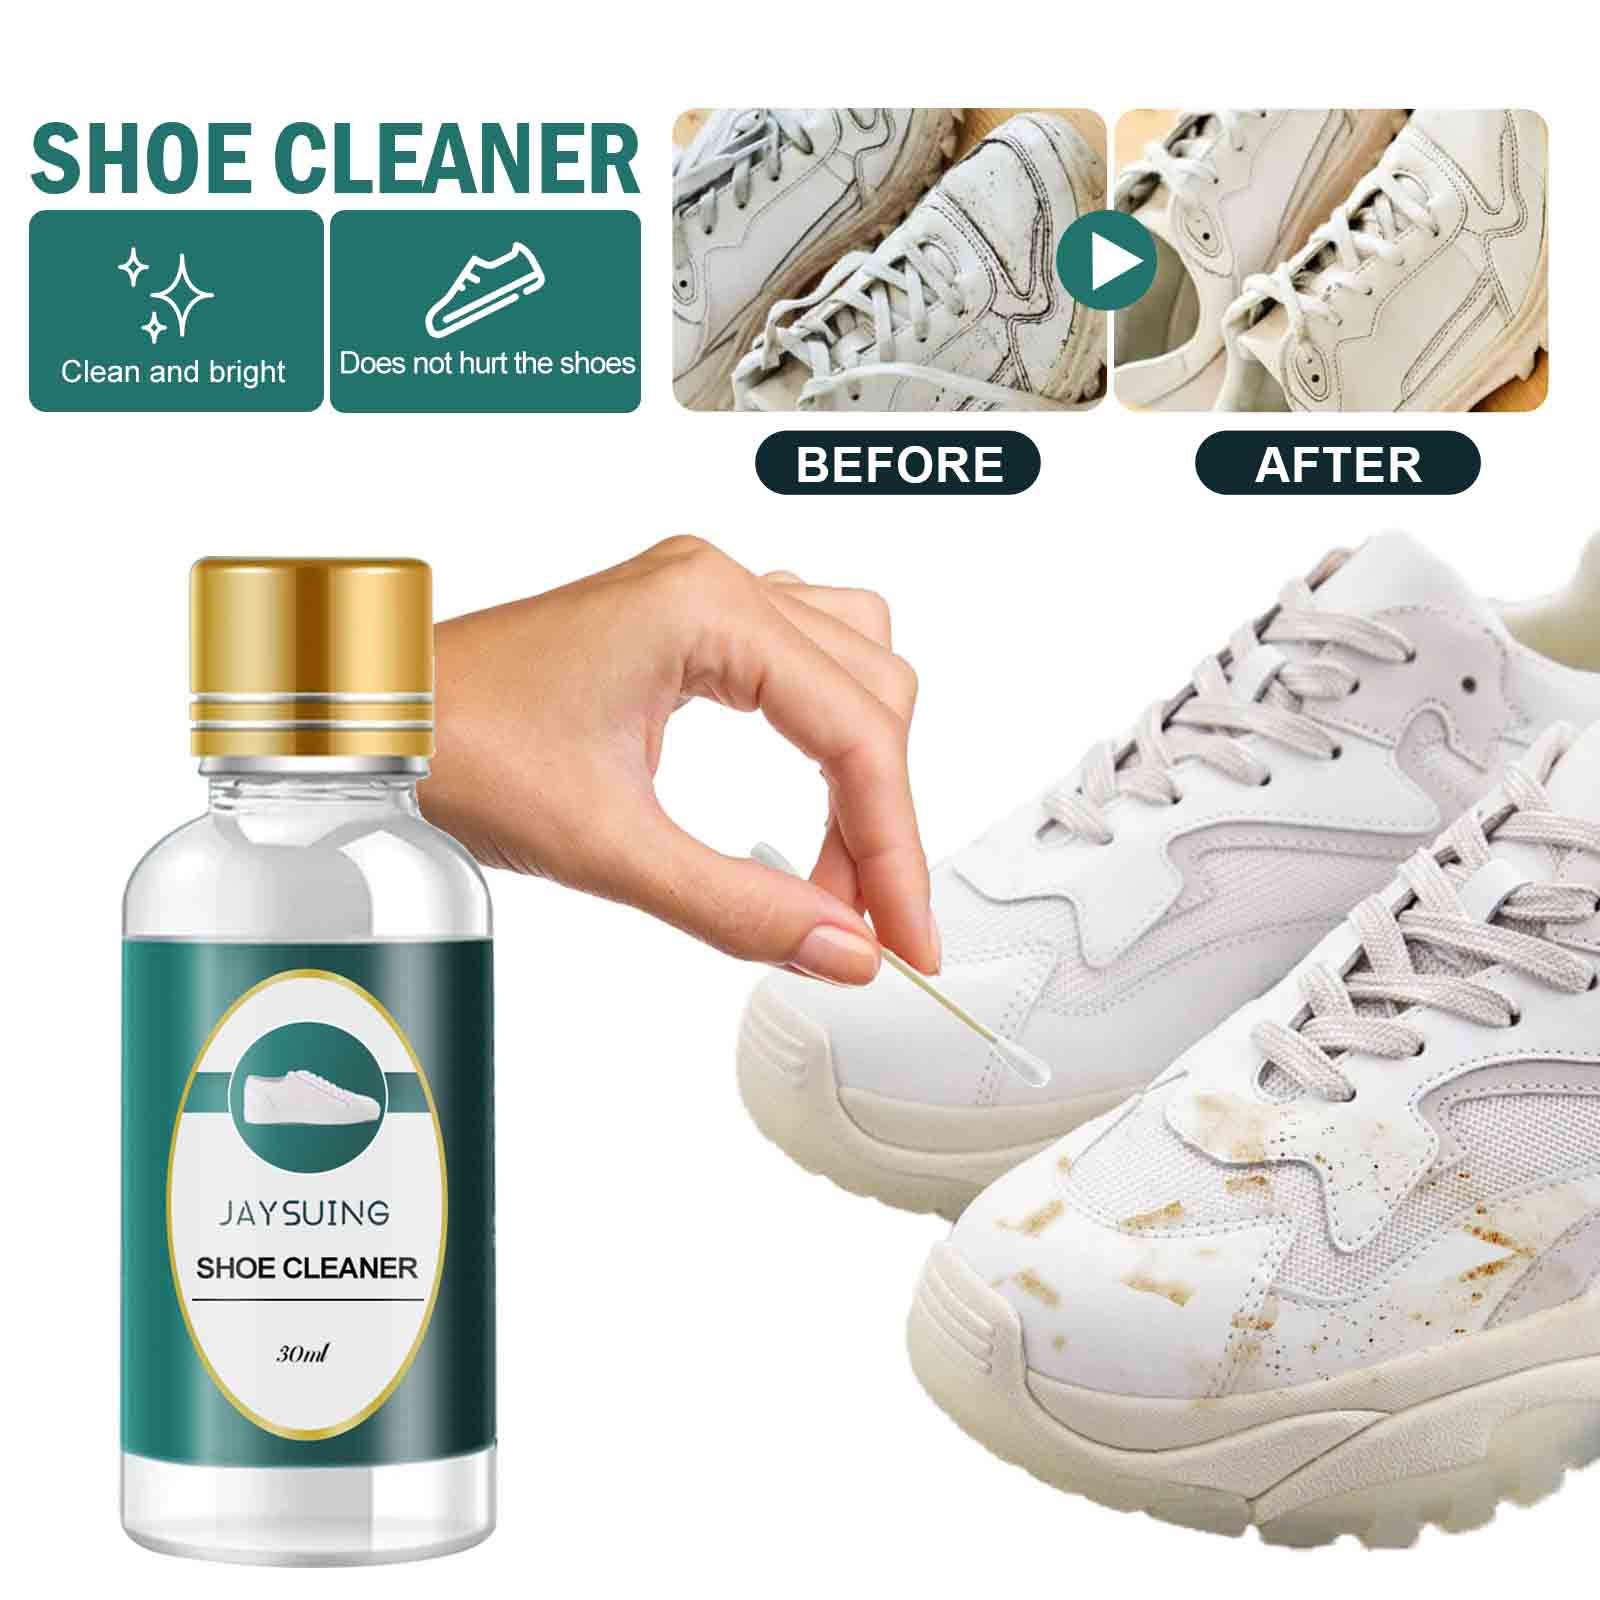 Shoe Cleaner Foam White Shoe Cleaner,Shoe Cleaner In Household Essentials  for Shoes, Boots, Handbags, Car Upholstery, Furniture- Removes Surface  Dirt